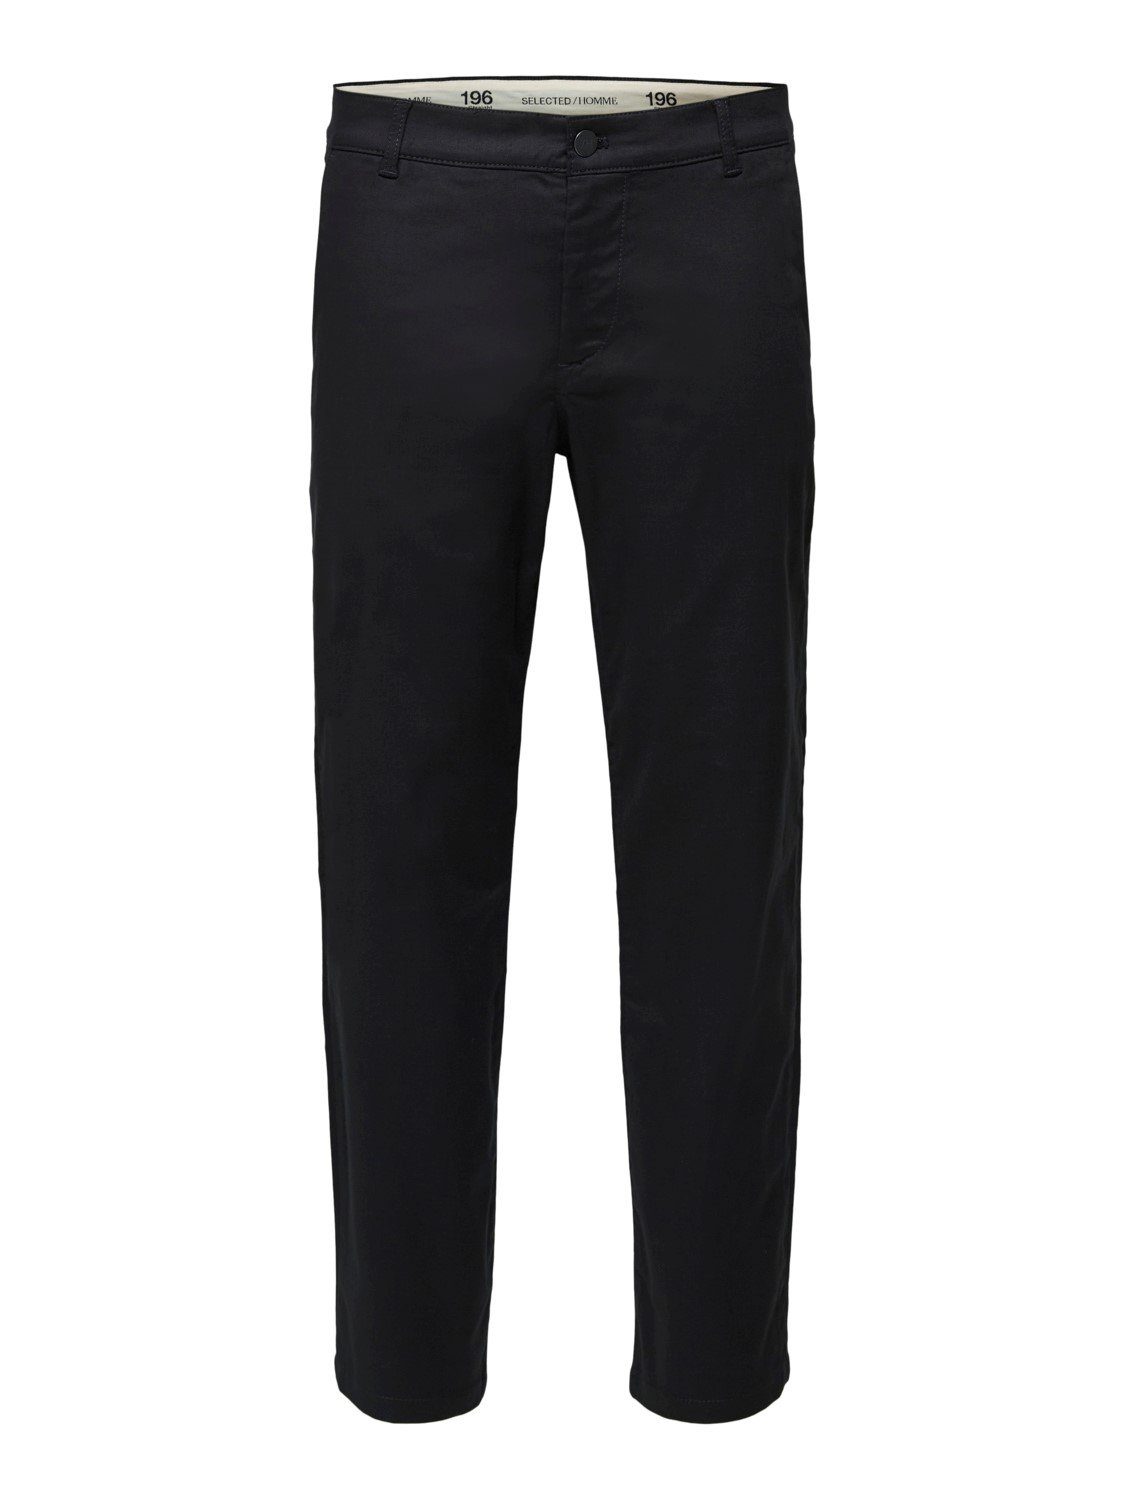 SELECTED HOMME Chinohose aus 16080157 SLHSTRAIGHT-STOKE Black Baumwolle